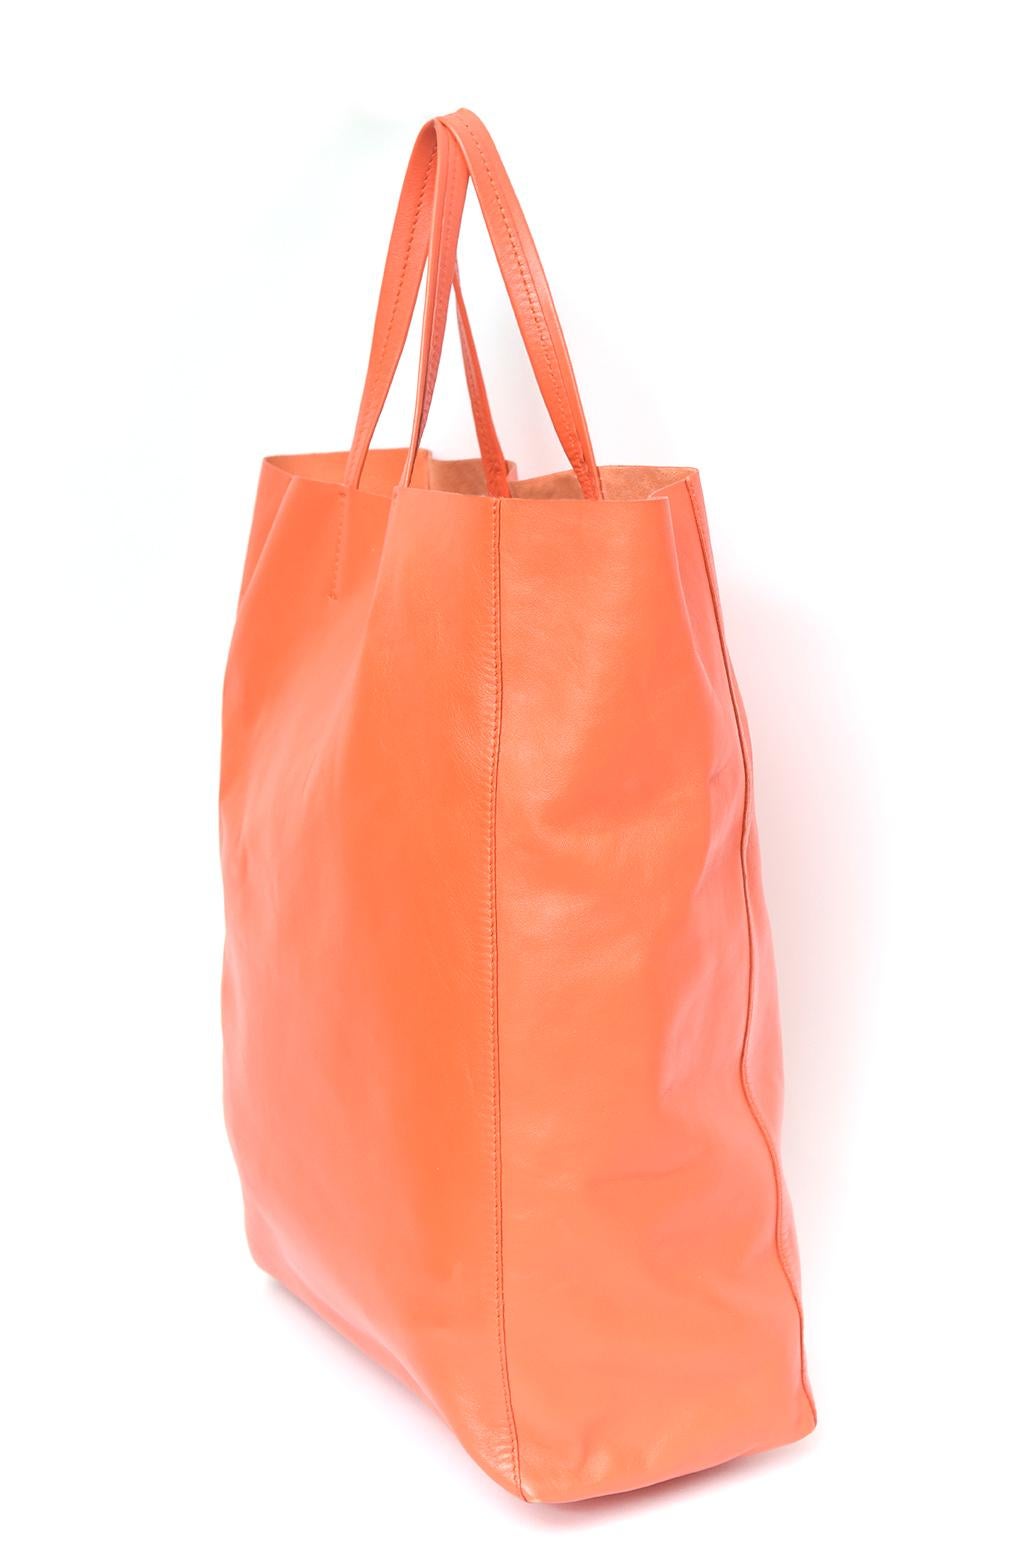 This large Celine orange leather Cabas tote bag is in excellent condition. It comes with the original duster.
It is 16